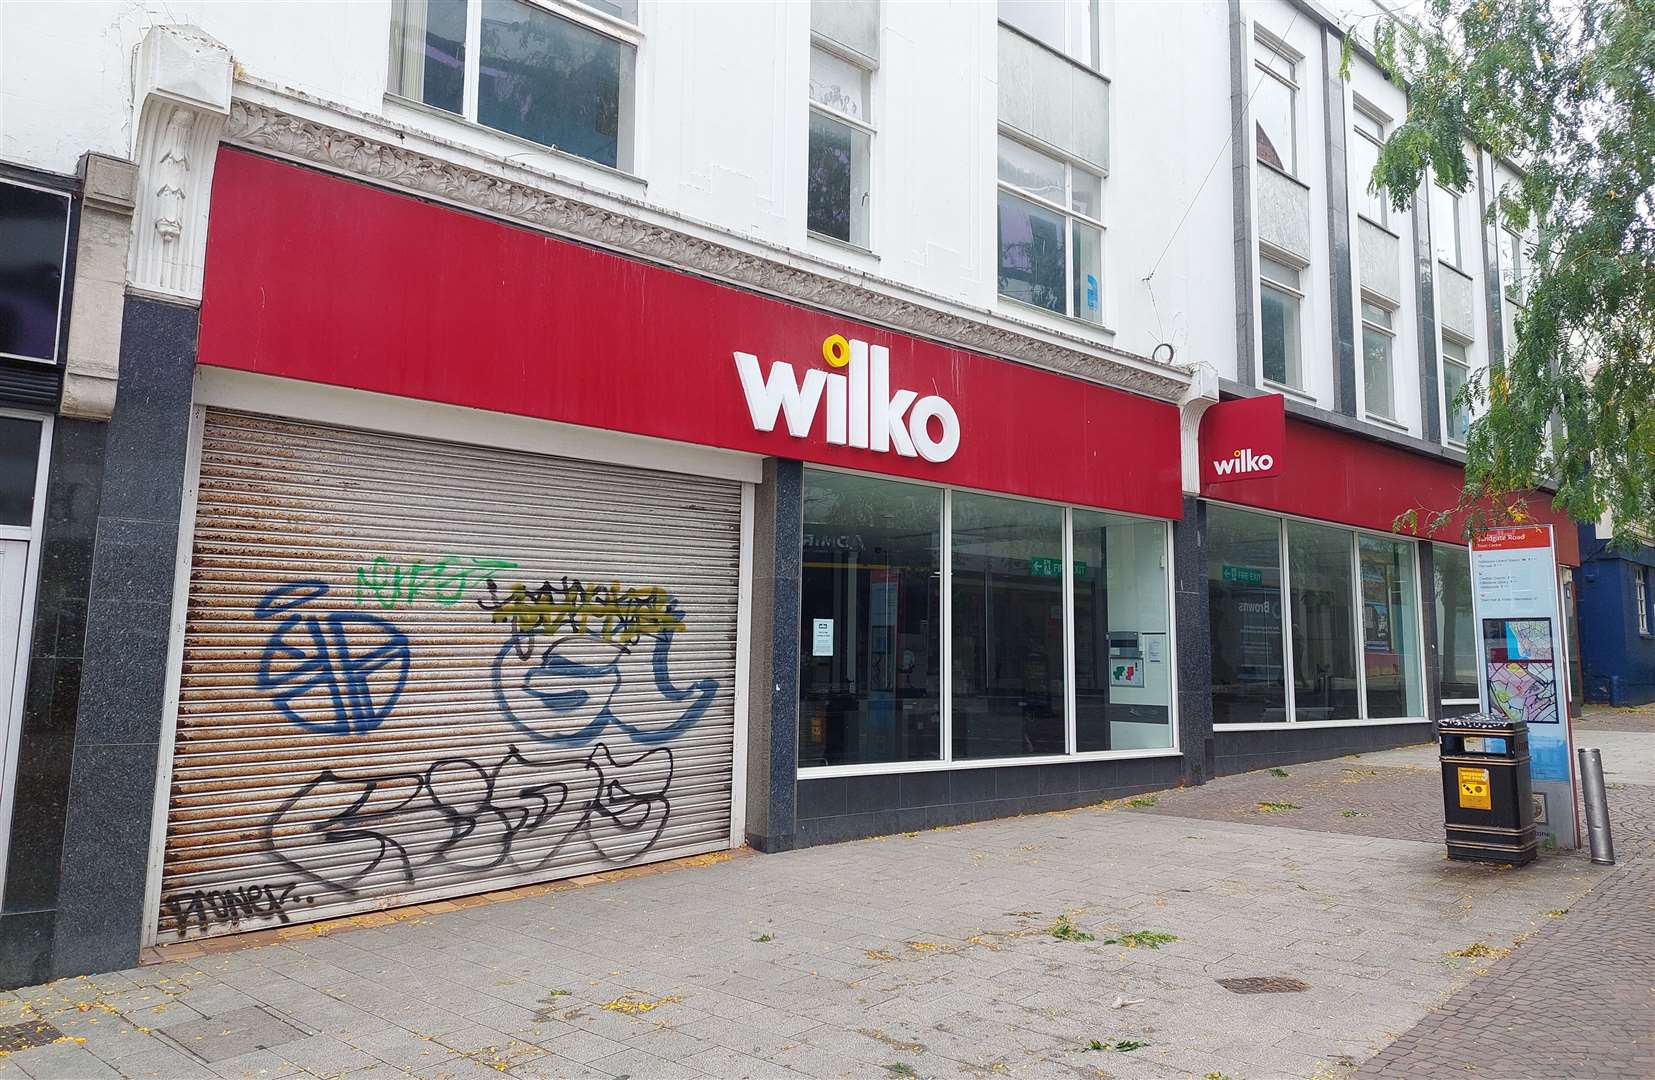 How many of us will miss stores like Wilko while still doing so much of our shopping online?